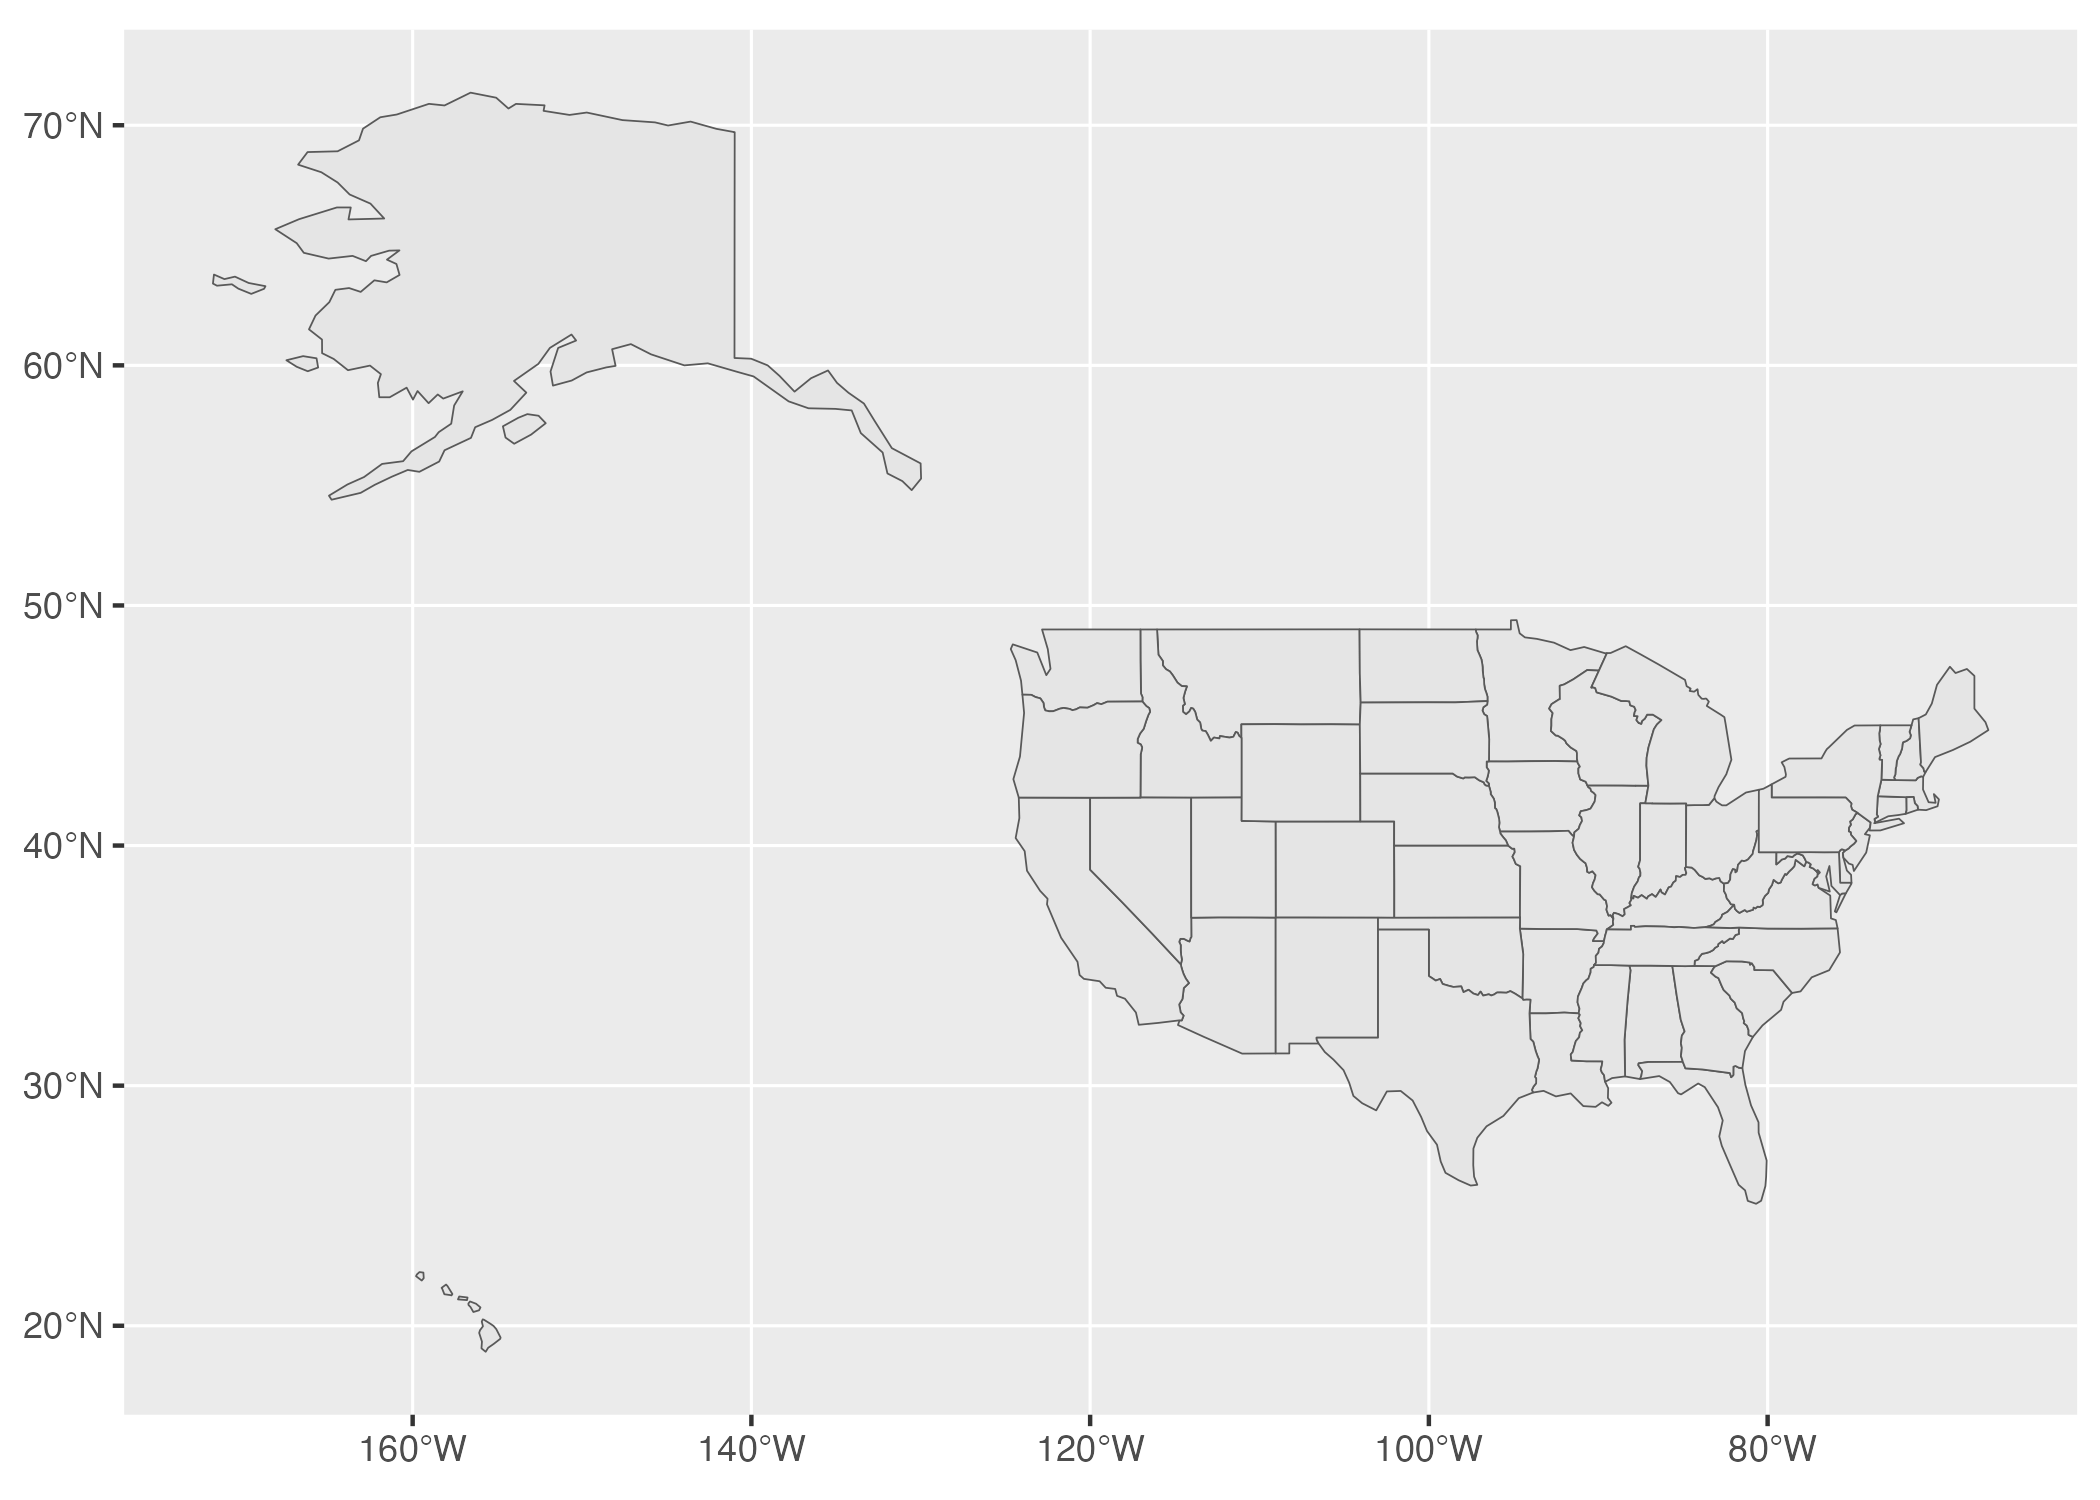 A map of the United States made with GeoJSON data